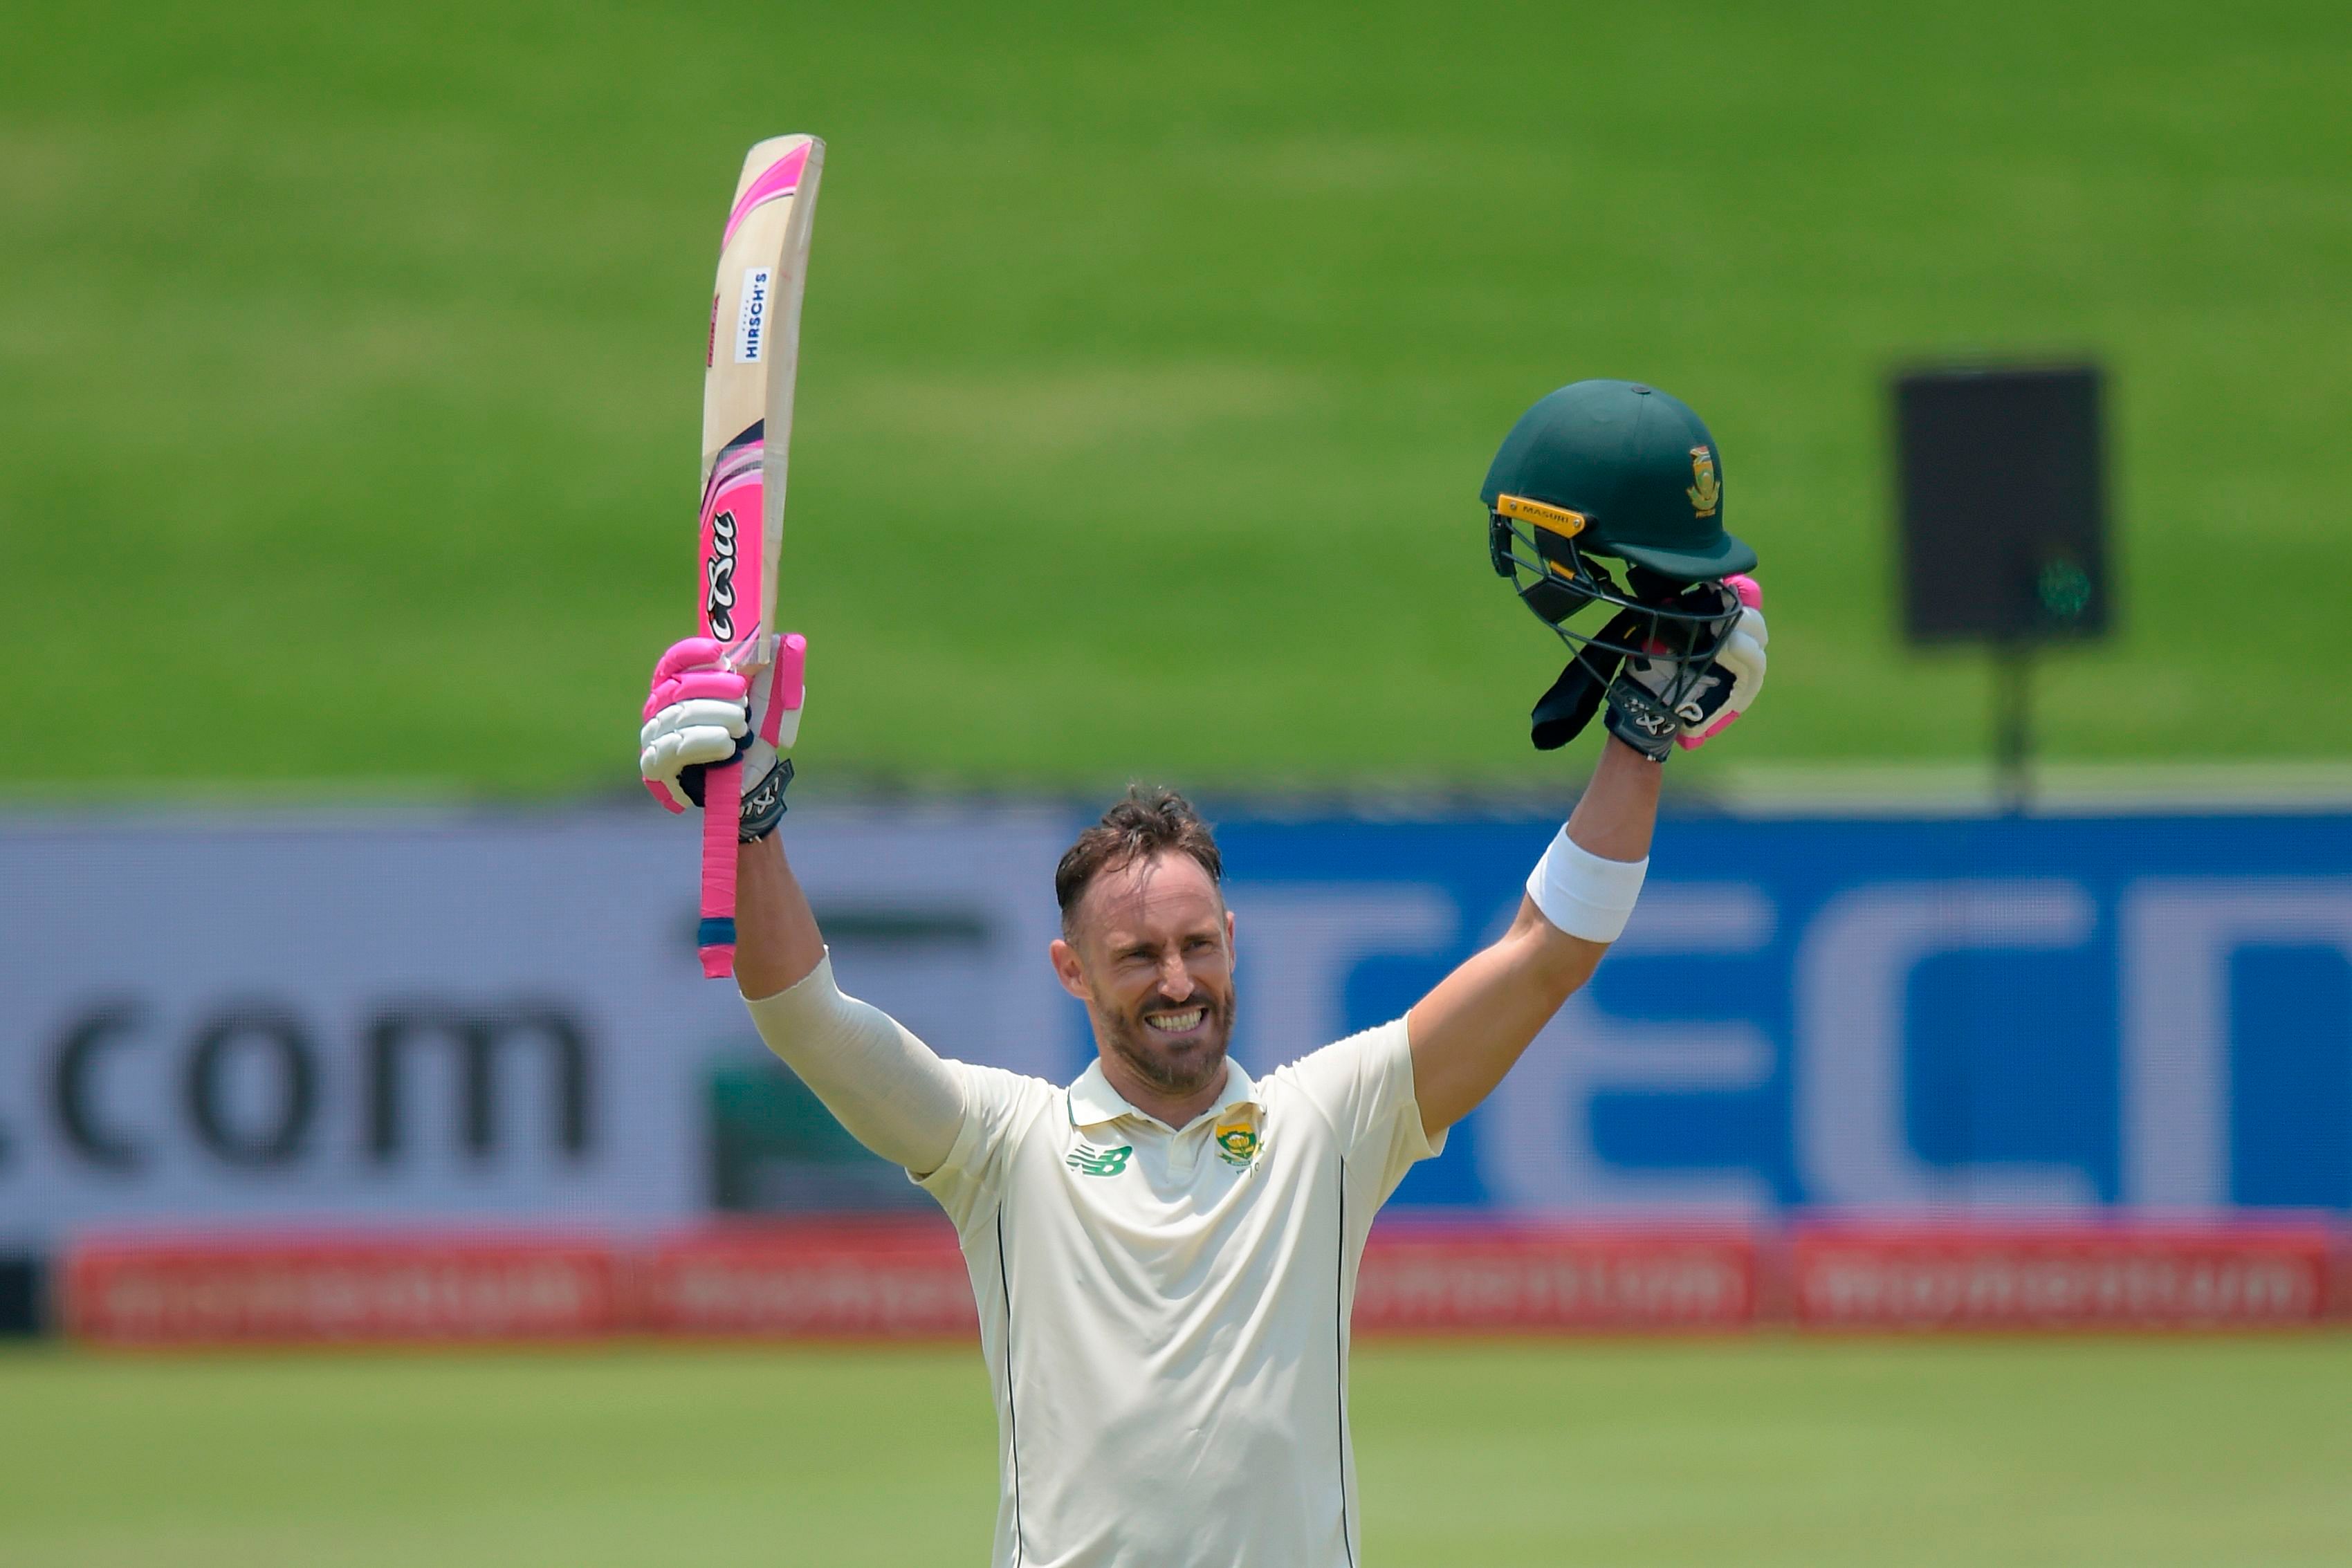 South Africa's Faf du Plessis celebrates after scoring a century (100 runs) during the third day of the first Test cricket match between South Africa and Sri Lanka at SuperSport Park in Centurion on December 28, 2020. Credit: AFP Photo